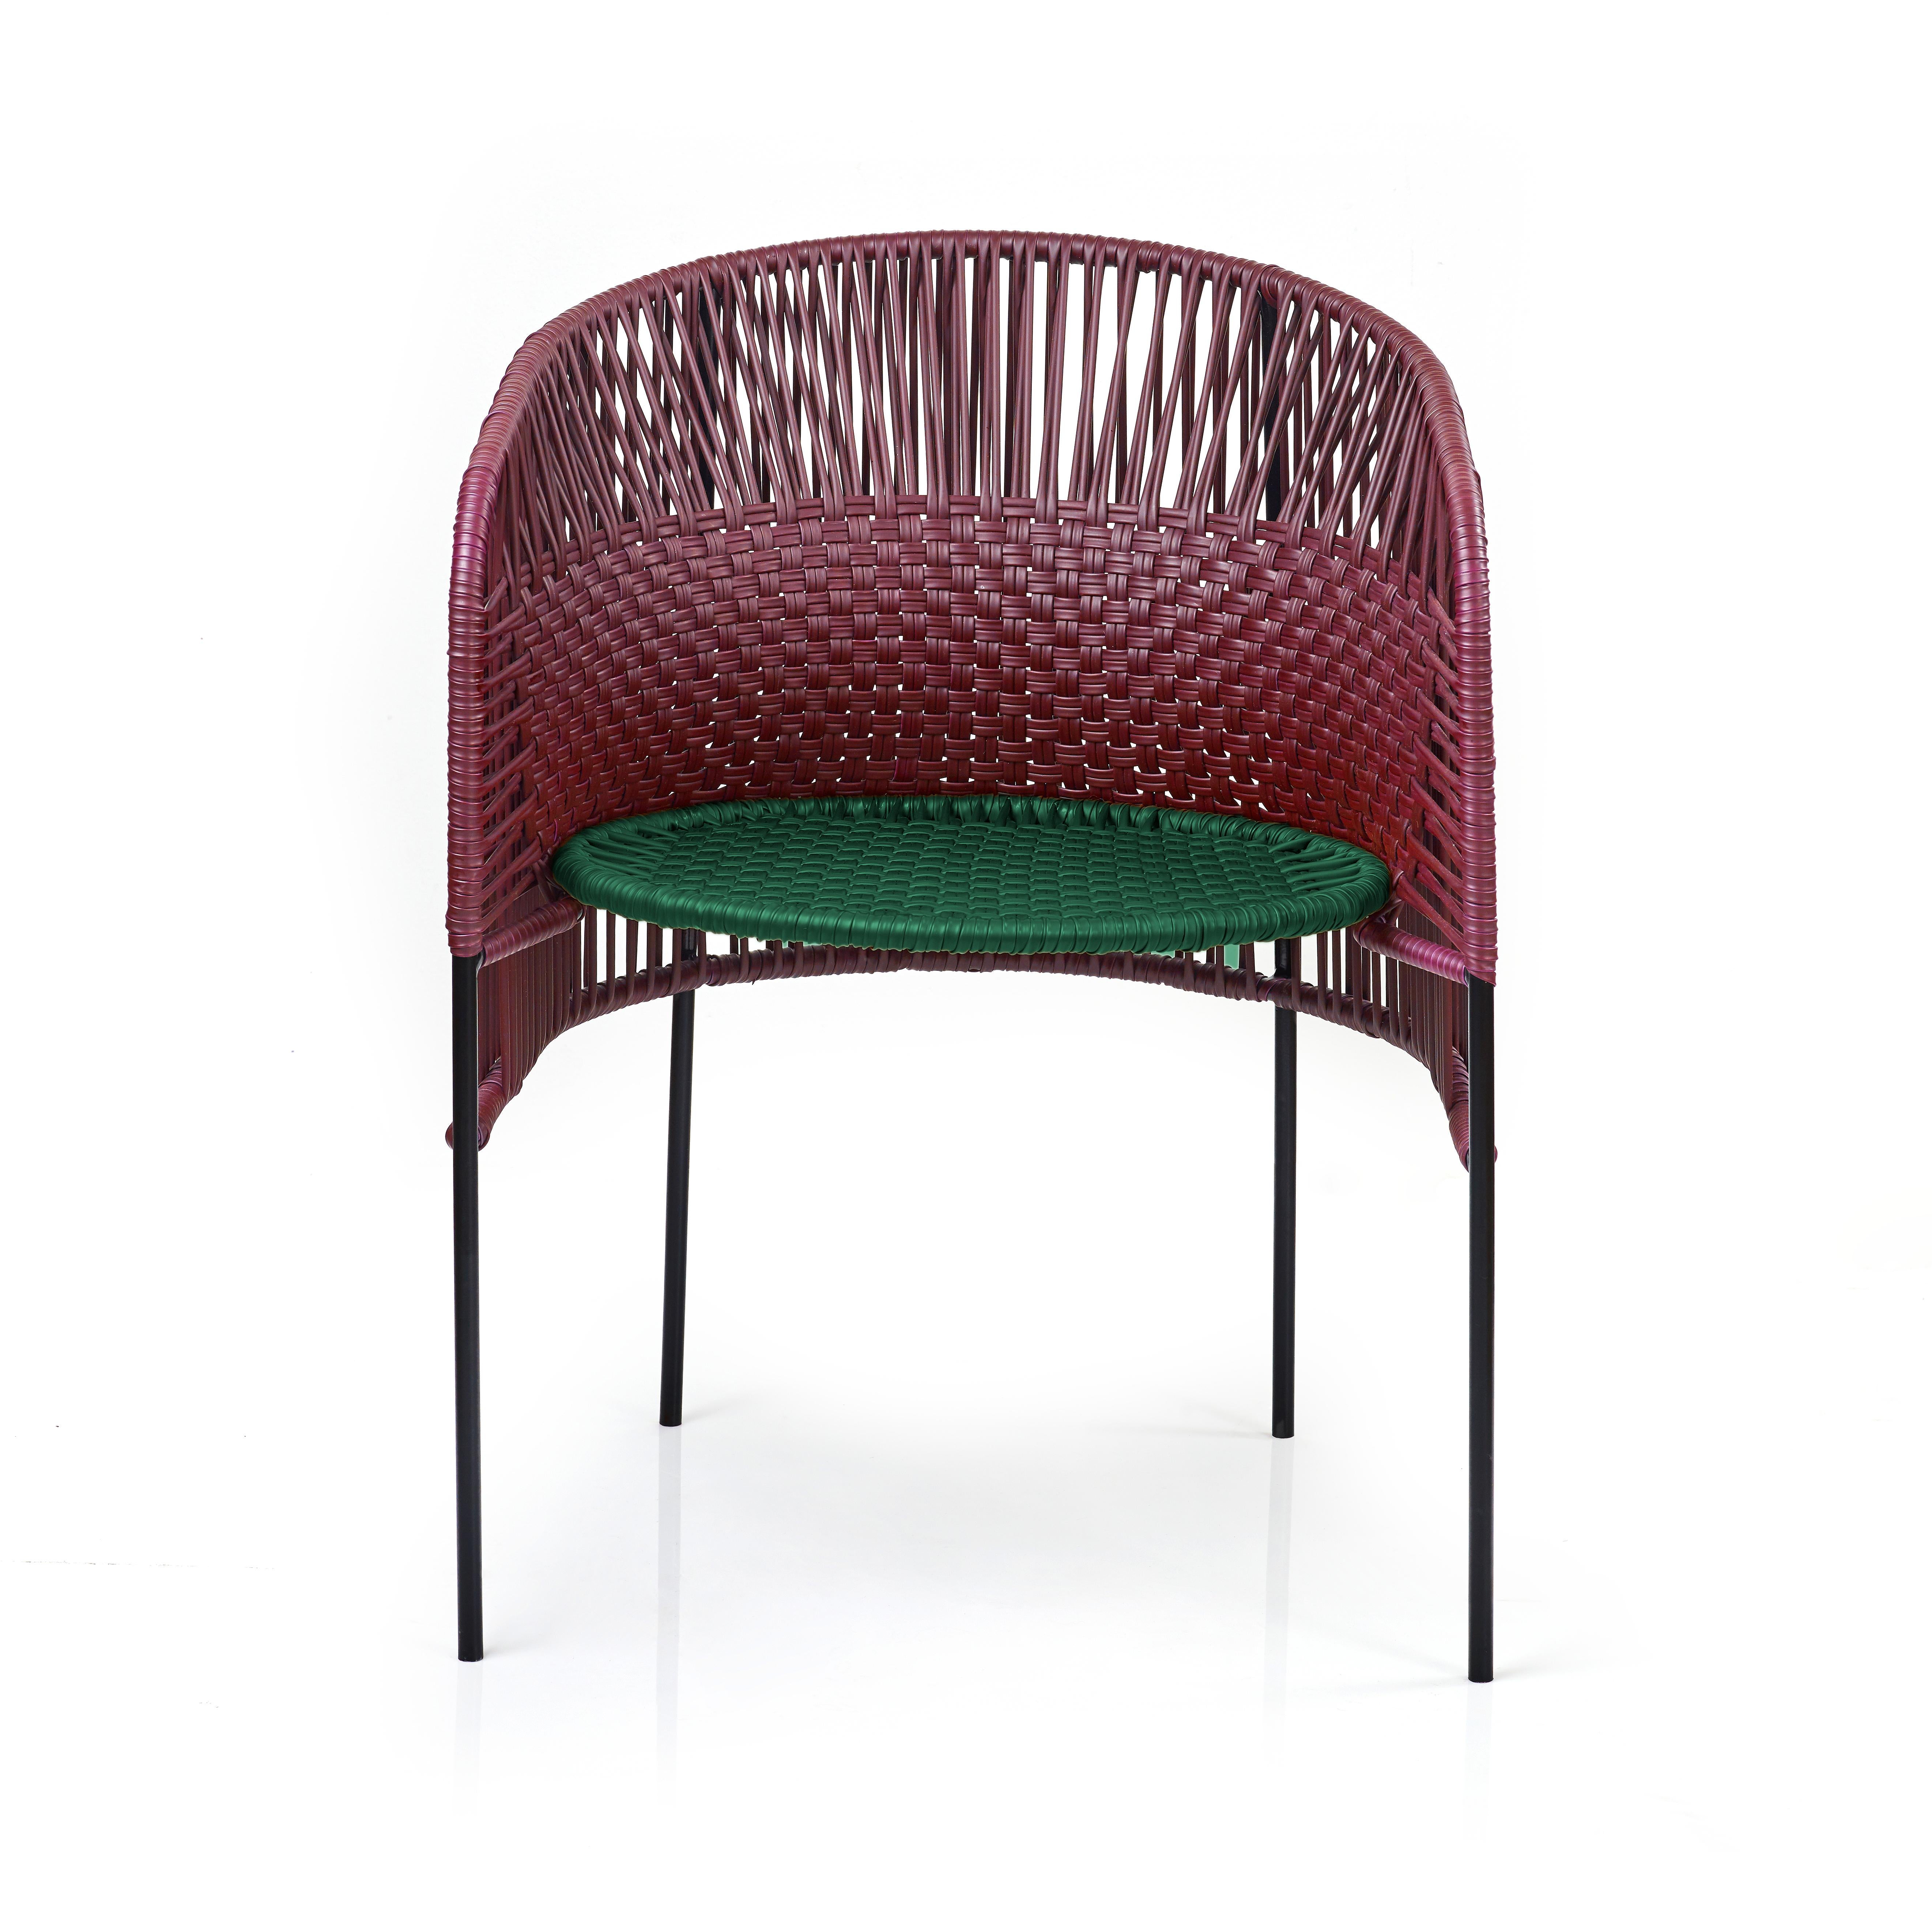 Set of 2 Violet green caribe chic dining chair by Sebastian Herkner.
Materials: Galvanized and powder-coated tubular steel. PVC strings are made from recycled plastic.
Technique: Made from recycled plastic and weaved by local craftspeople in